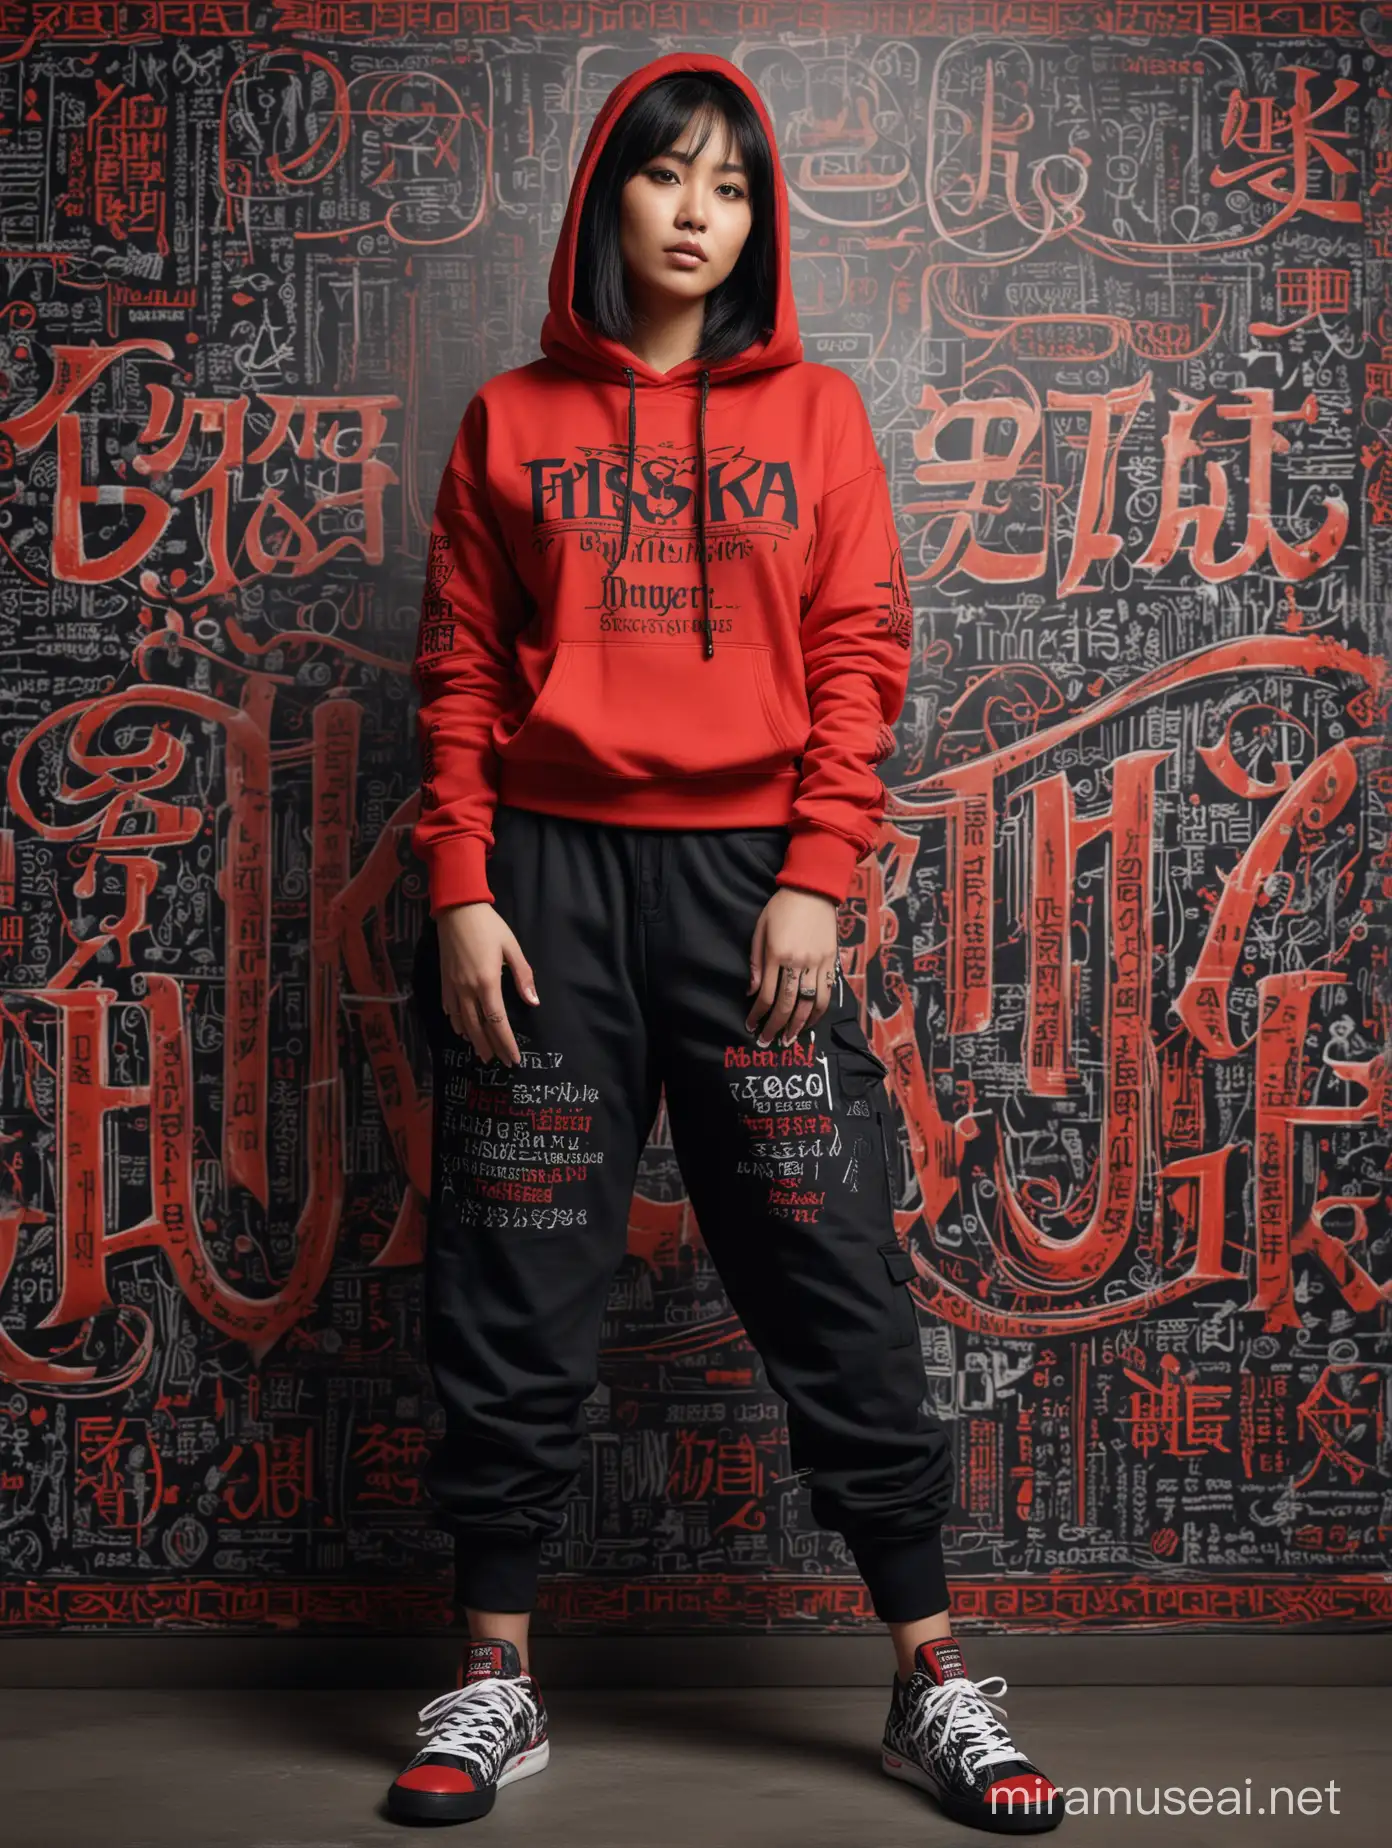 lissajous in the form of complicated FRISKA text, complicated FRISKA text, red and black, very beautiful fat Asian girl, cool expression, few tattoos, black bracelet, wearing a hoodie ("FRISKA") metal screen printing that says ("FRISKA"), long cargo pants, senaekers shoes, background with lots of lissajous shaped text ("FRISKA") complicated metal, complicated gothic, dramatic colorful light, hyper realistic , sharp focus makes the image very detailed , aesthetics, sharp contrast , 64k megapixels, ultra HD